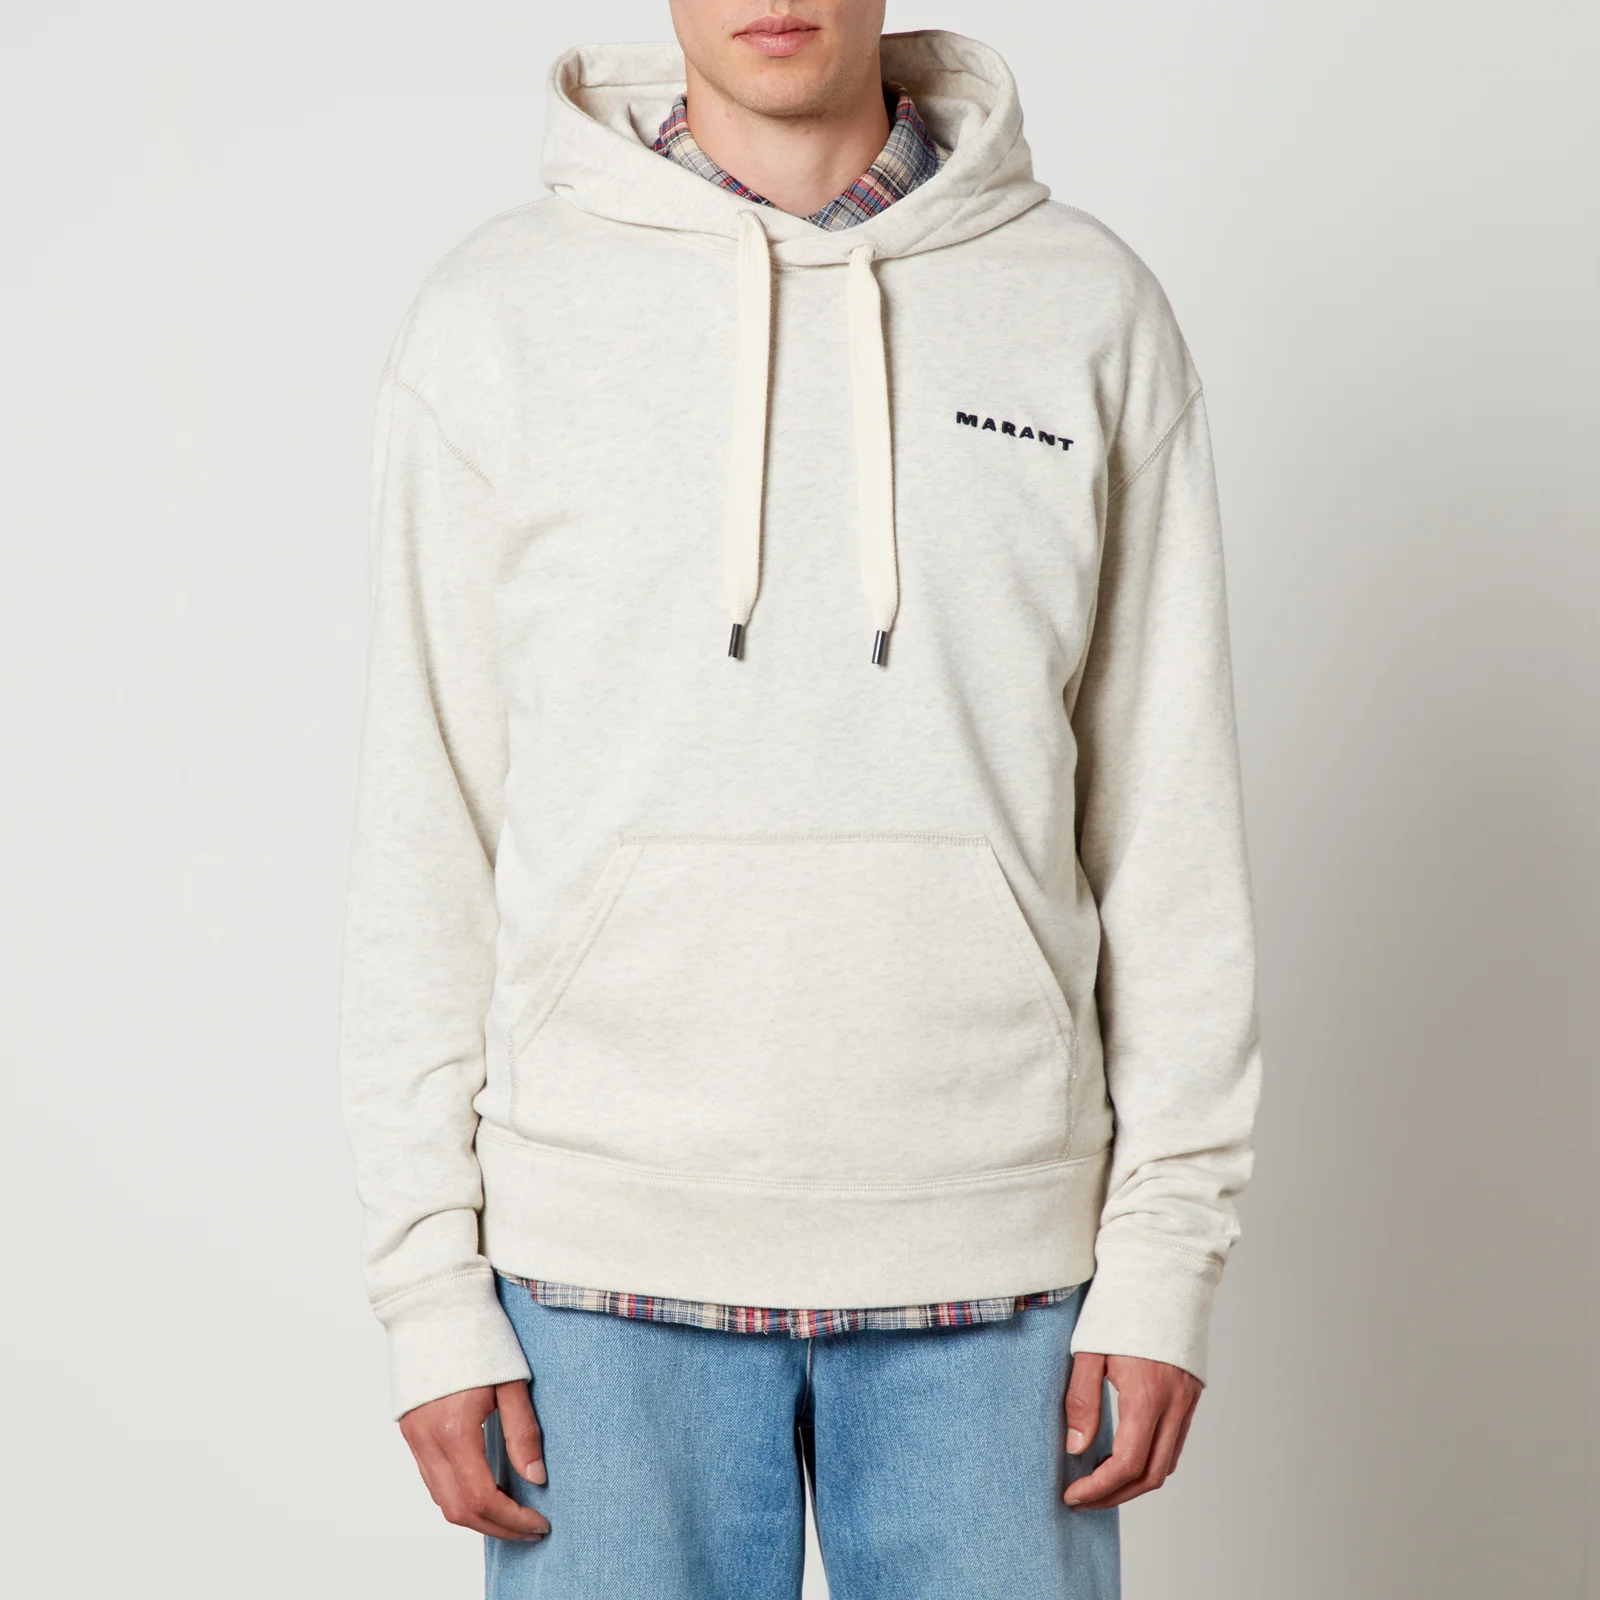 MARANT Marcello Loopback Cotton-Blend Jersey Hoodie Image 1